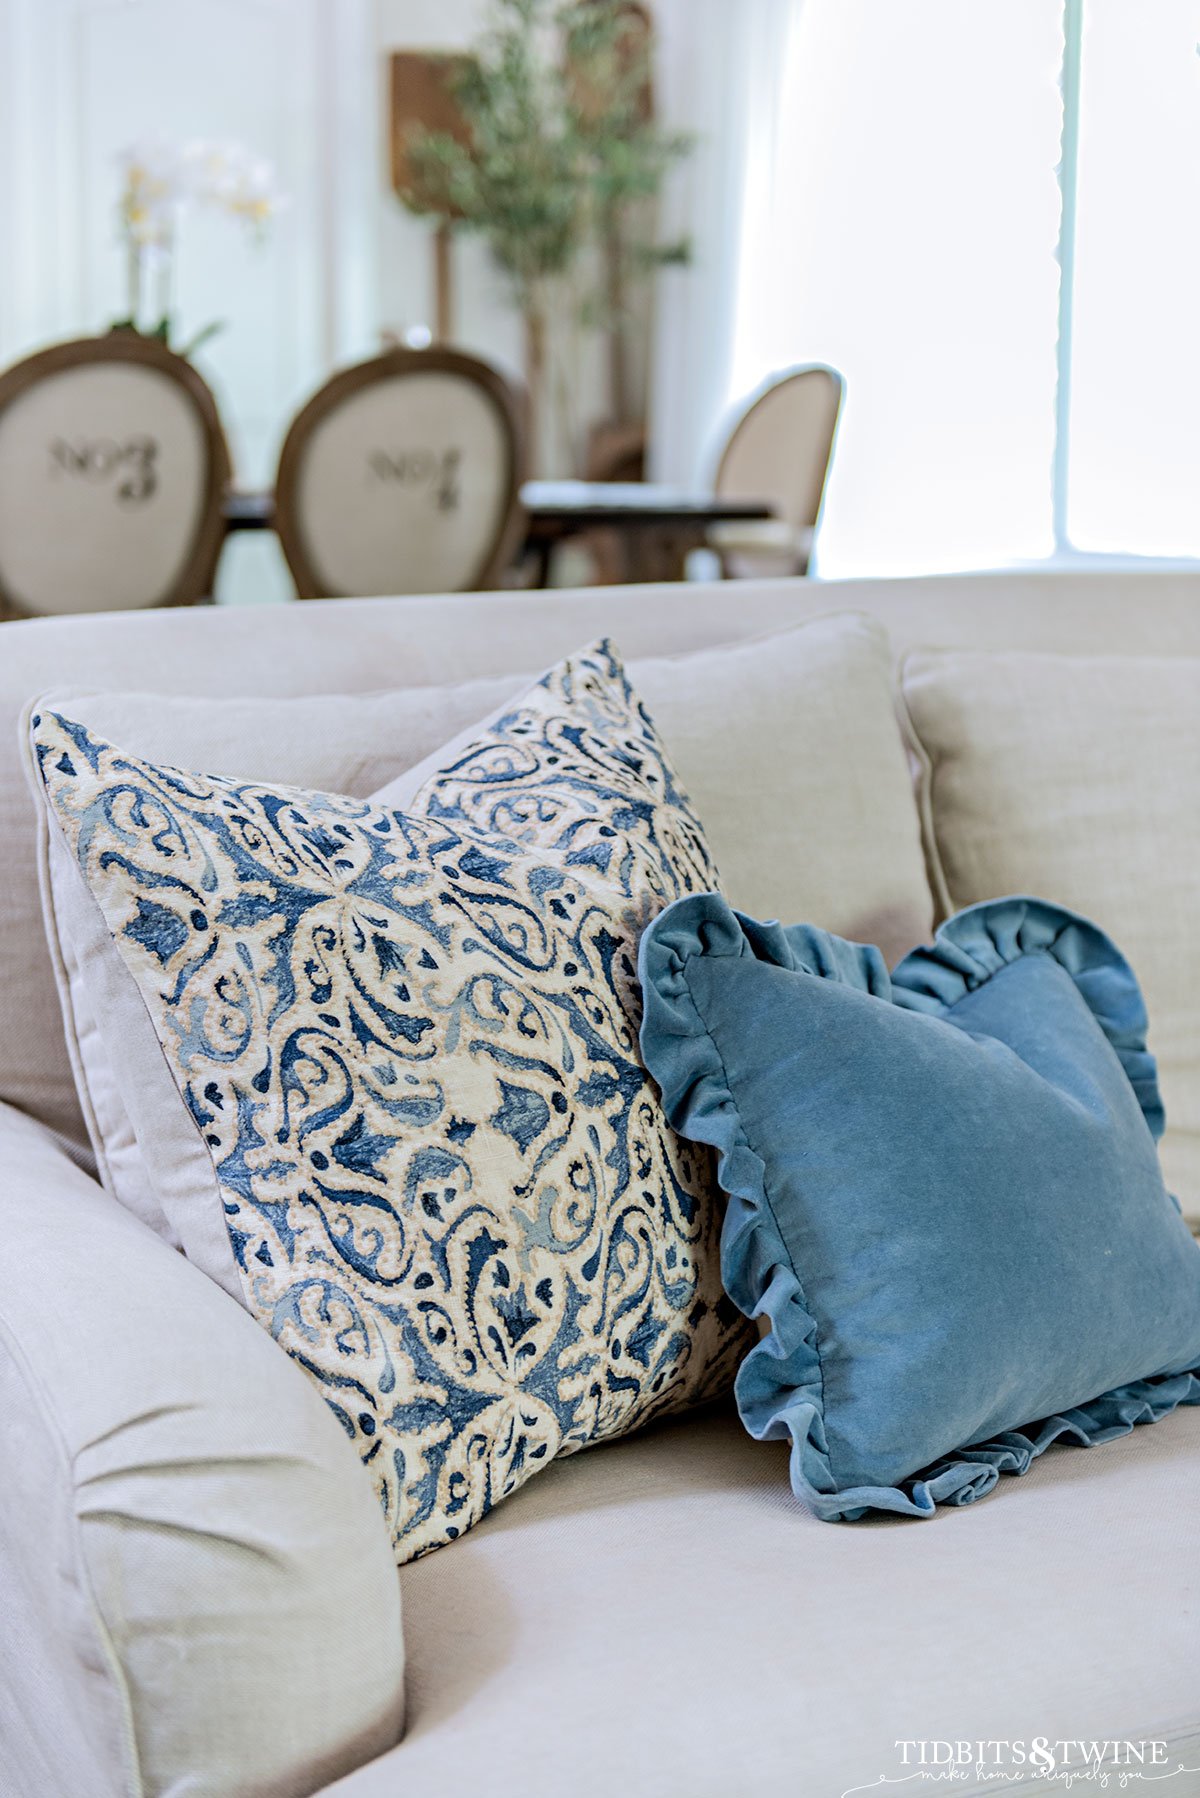 The Ultimate Guide to Couch Throw Pillow Sizes & Arrangements